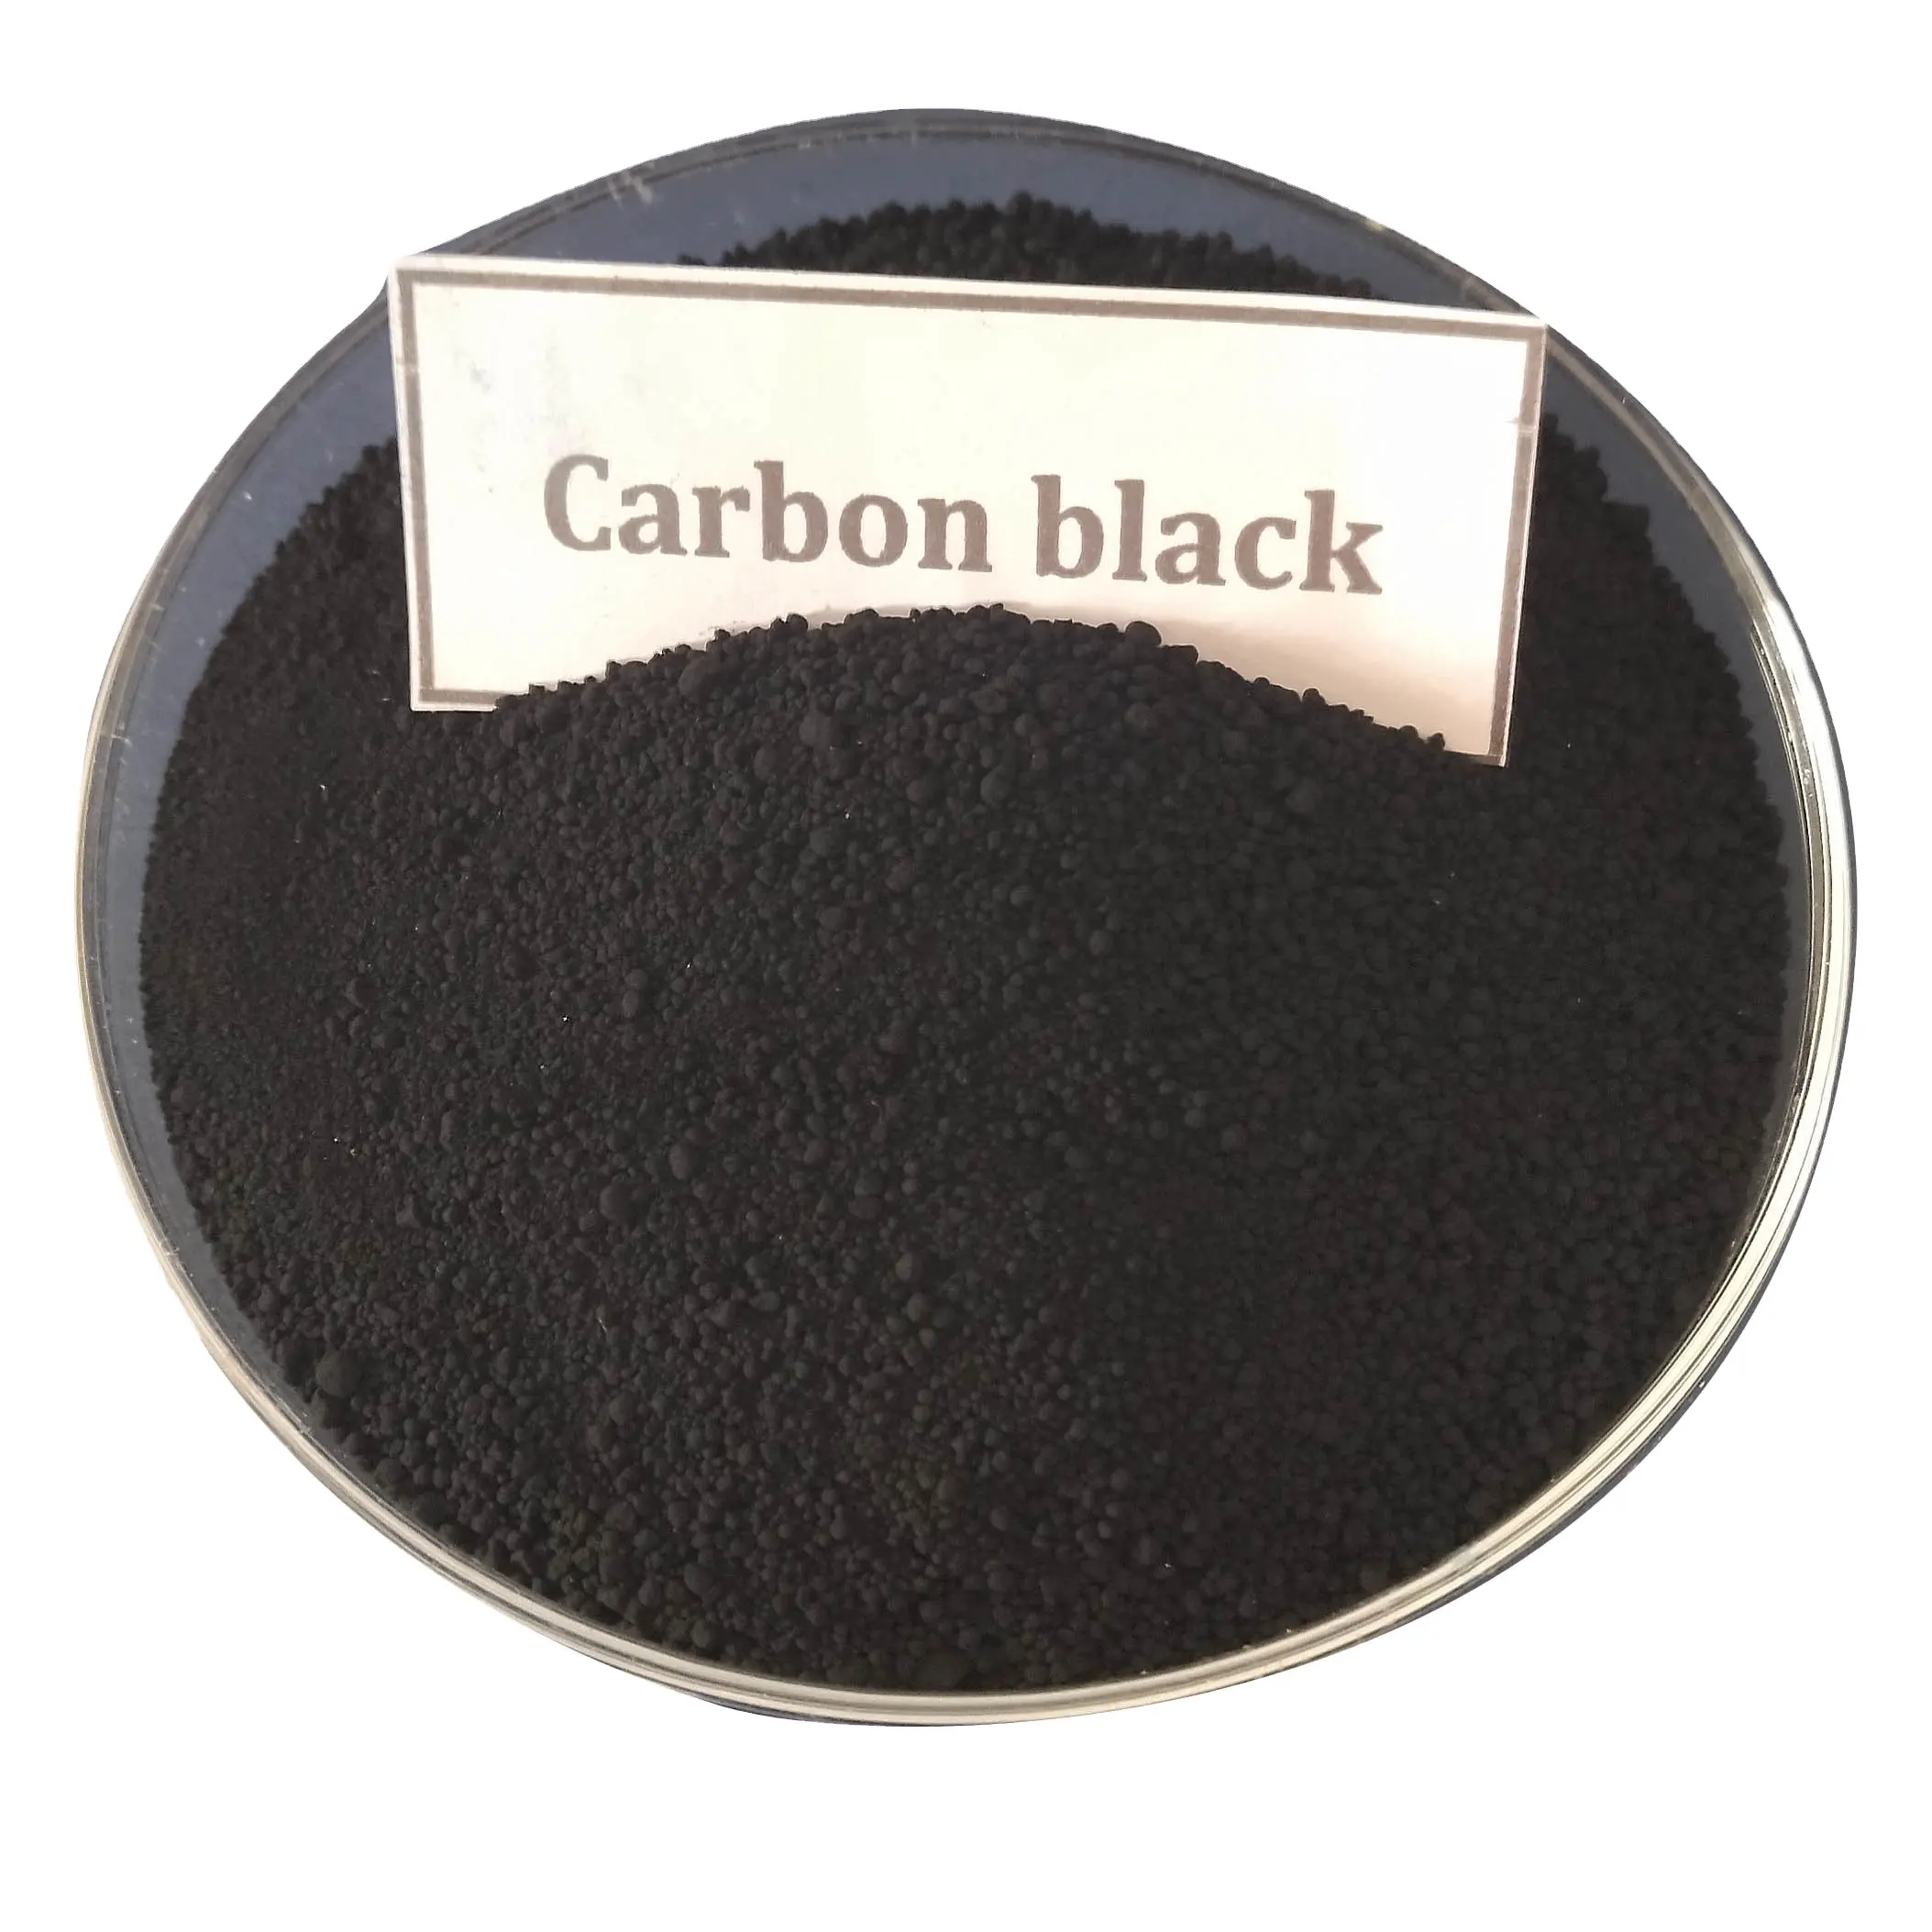 Carbon Black (N550) High-Quality Activated Carbon Black in Rubber and Plastics Carbon Black For Paint Industries